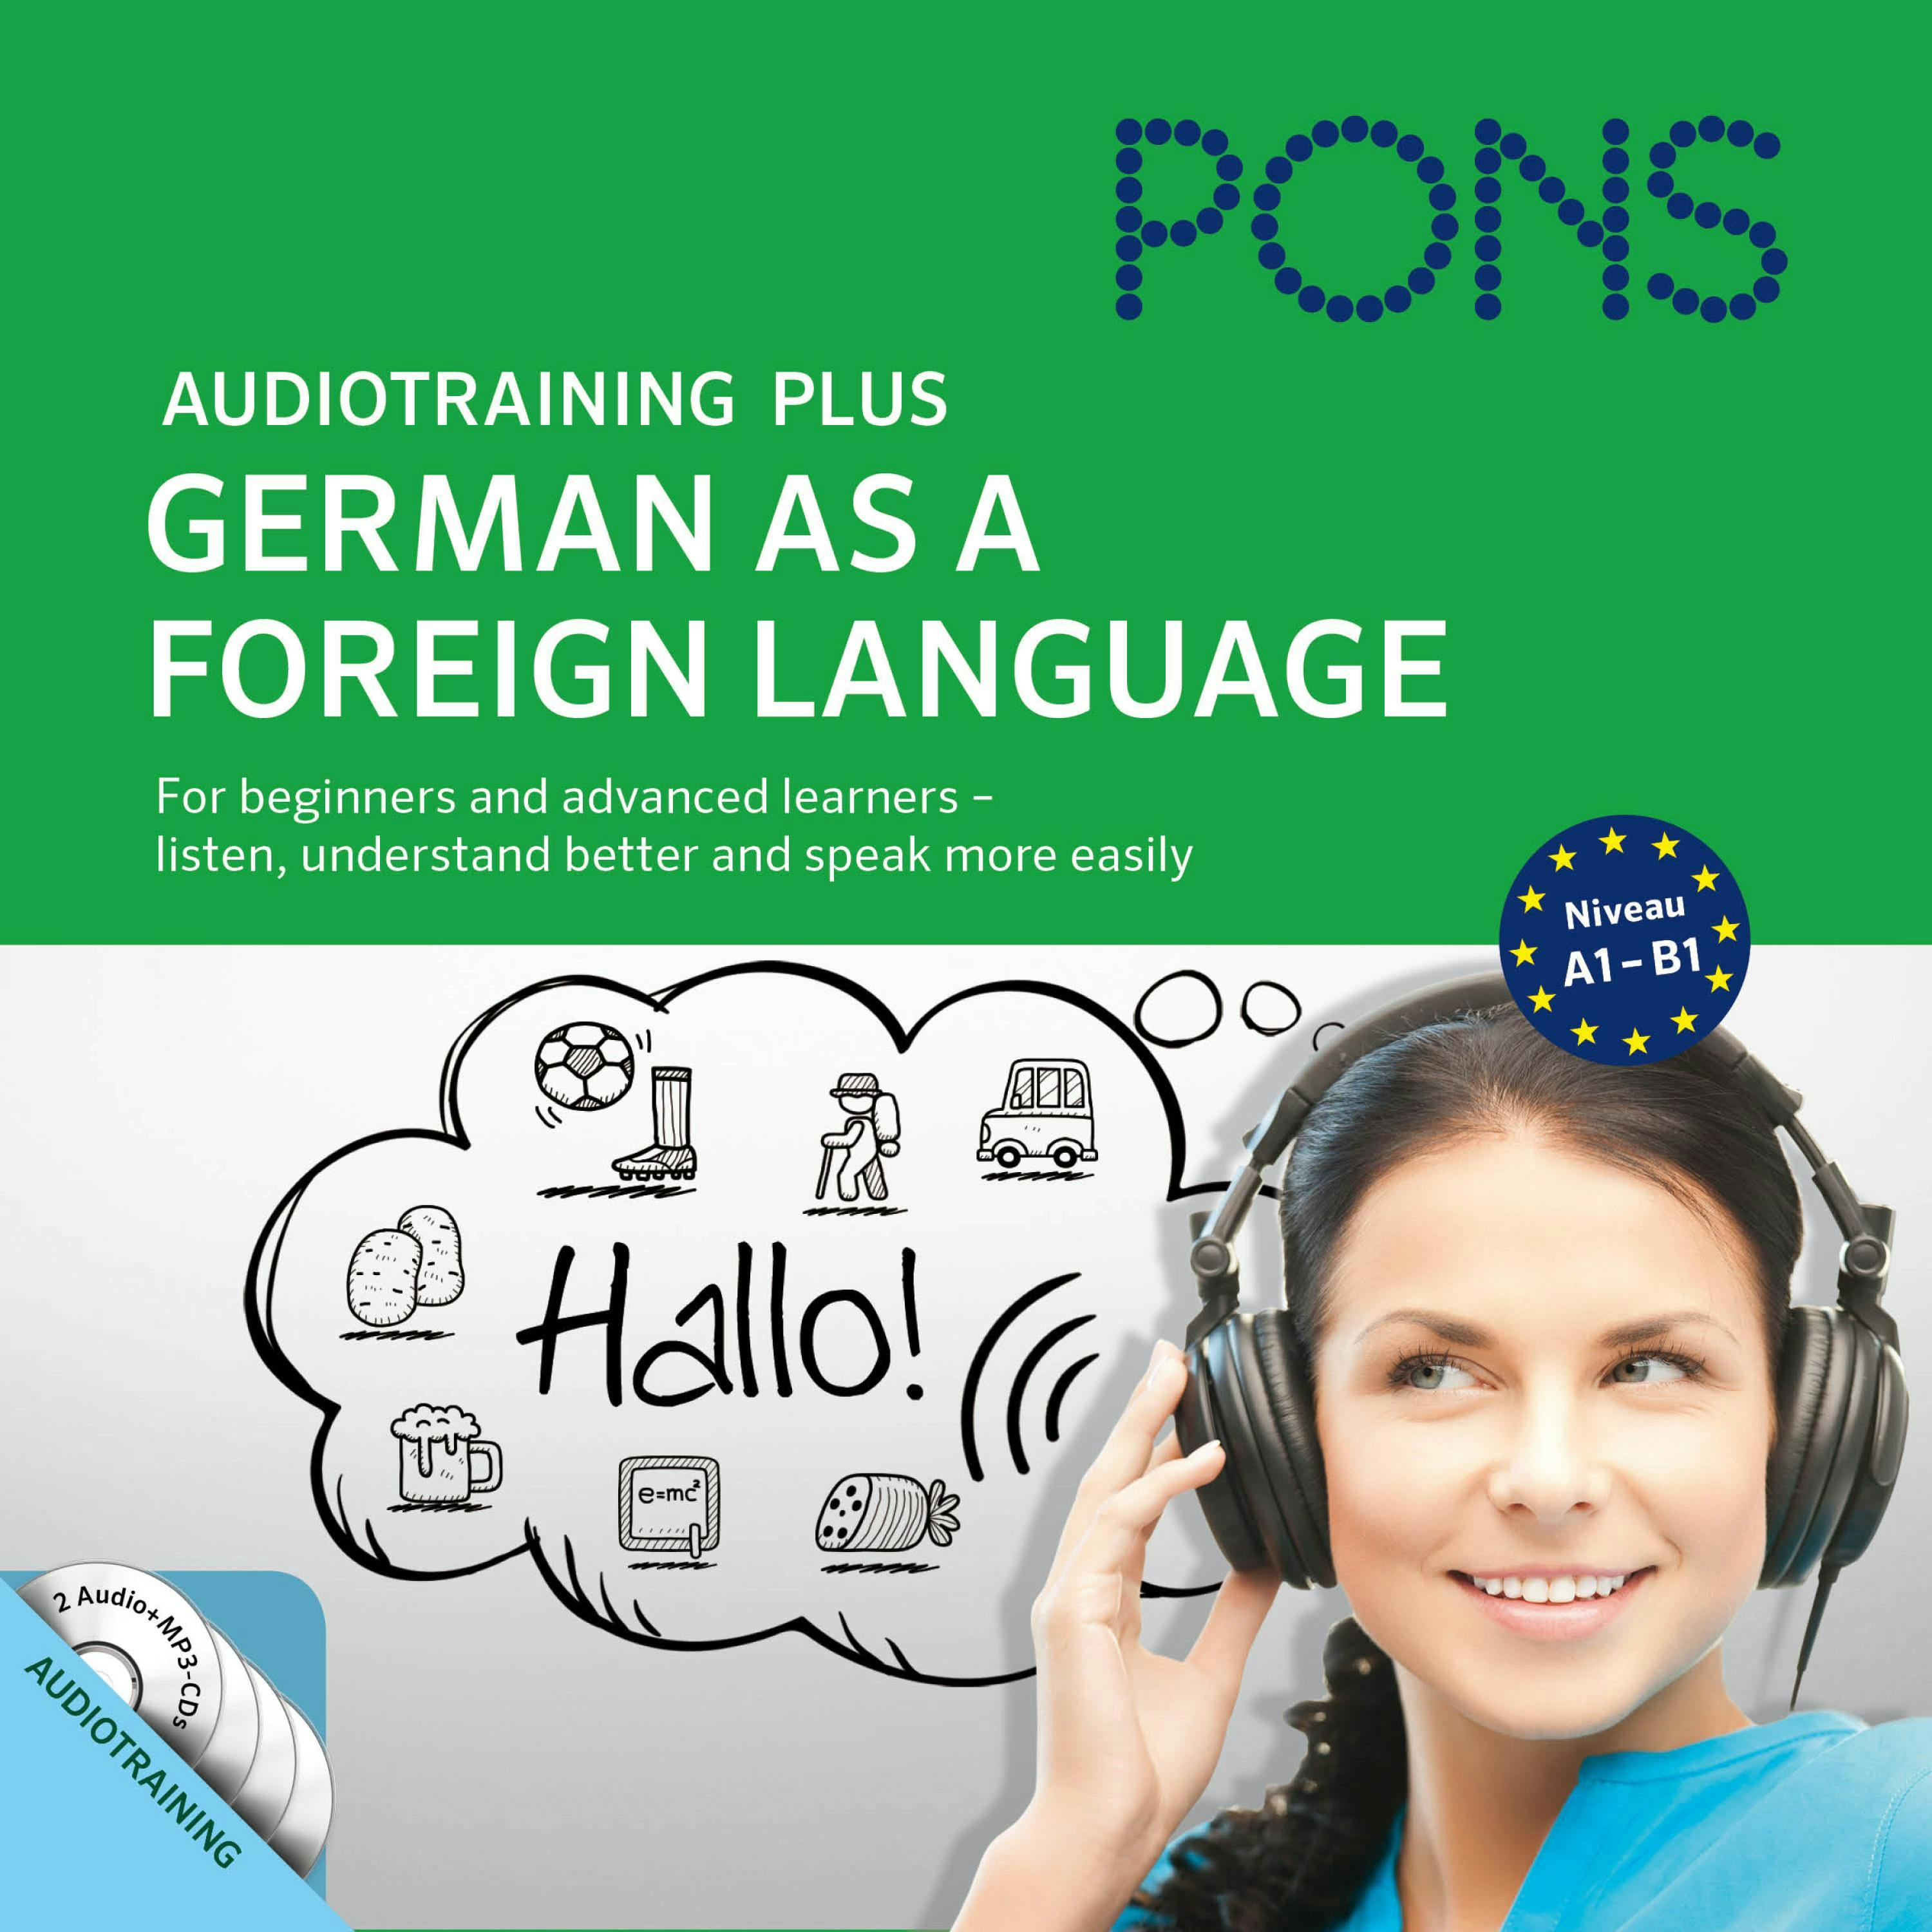 PONS Audiotraining Plus - German as a Foreign Language: For beginners and advanced learners - listen, understand better and speak more easily - PONS-Redaktion, Christine Breslauer, Anke Levin-Steinmann